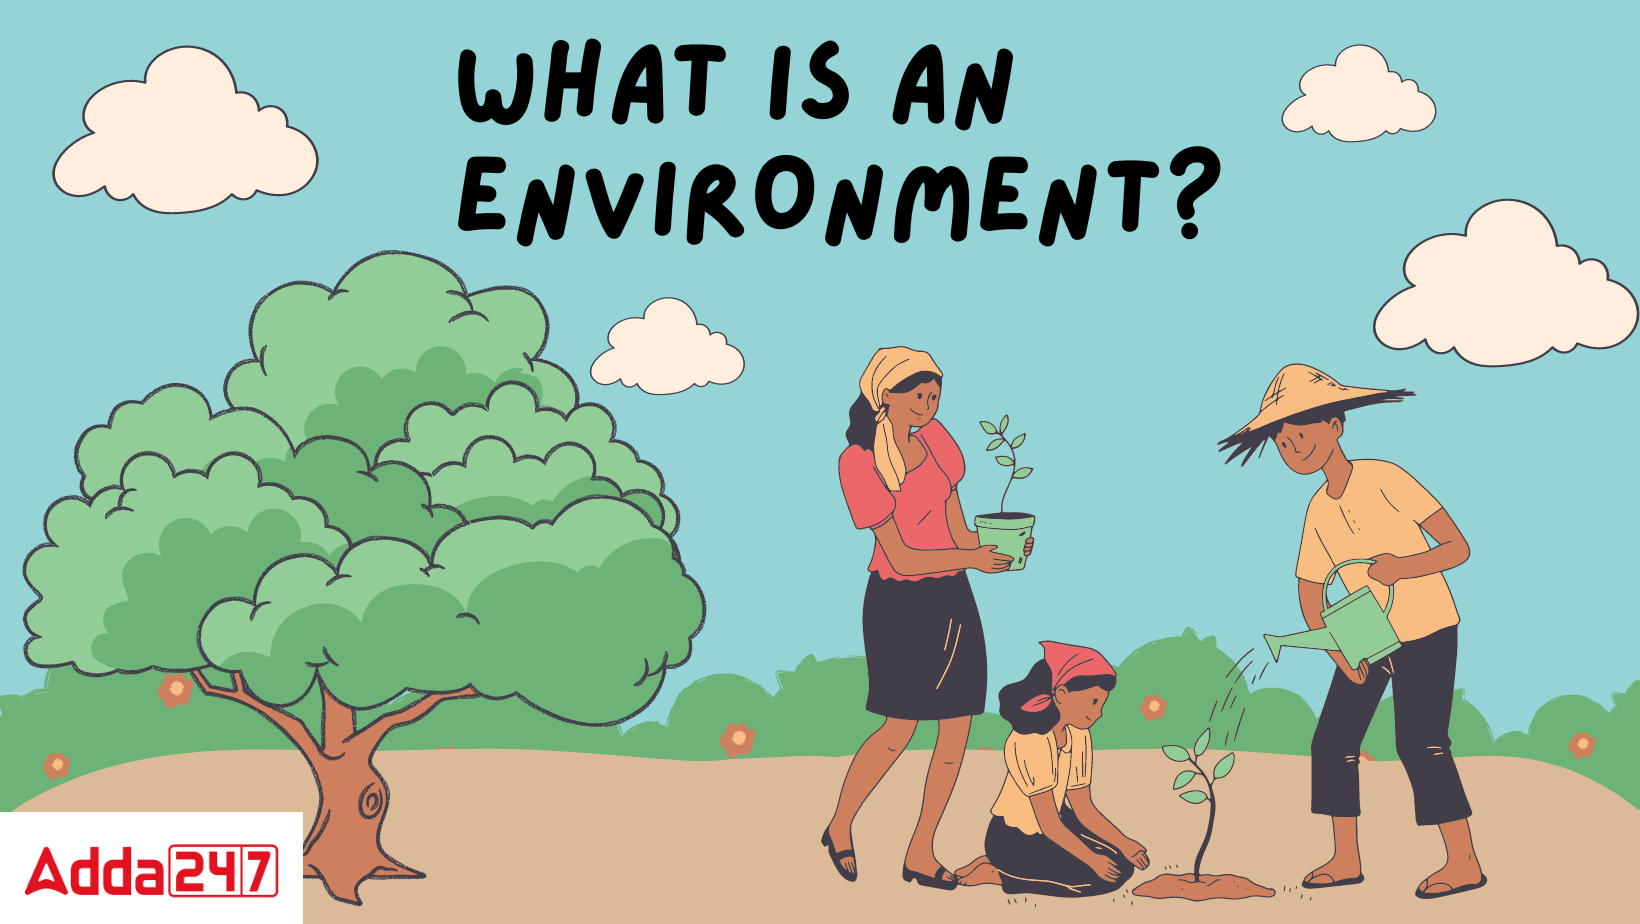 wHAT IS AN ENVIRONMENT